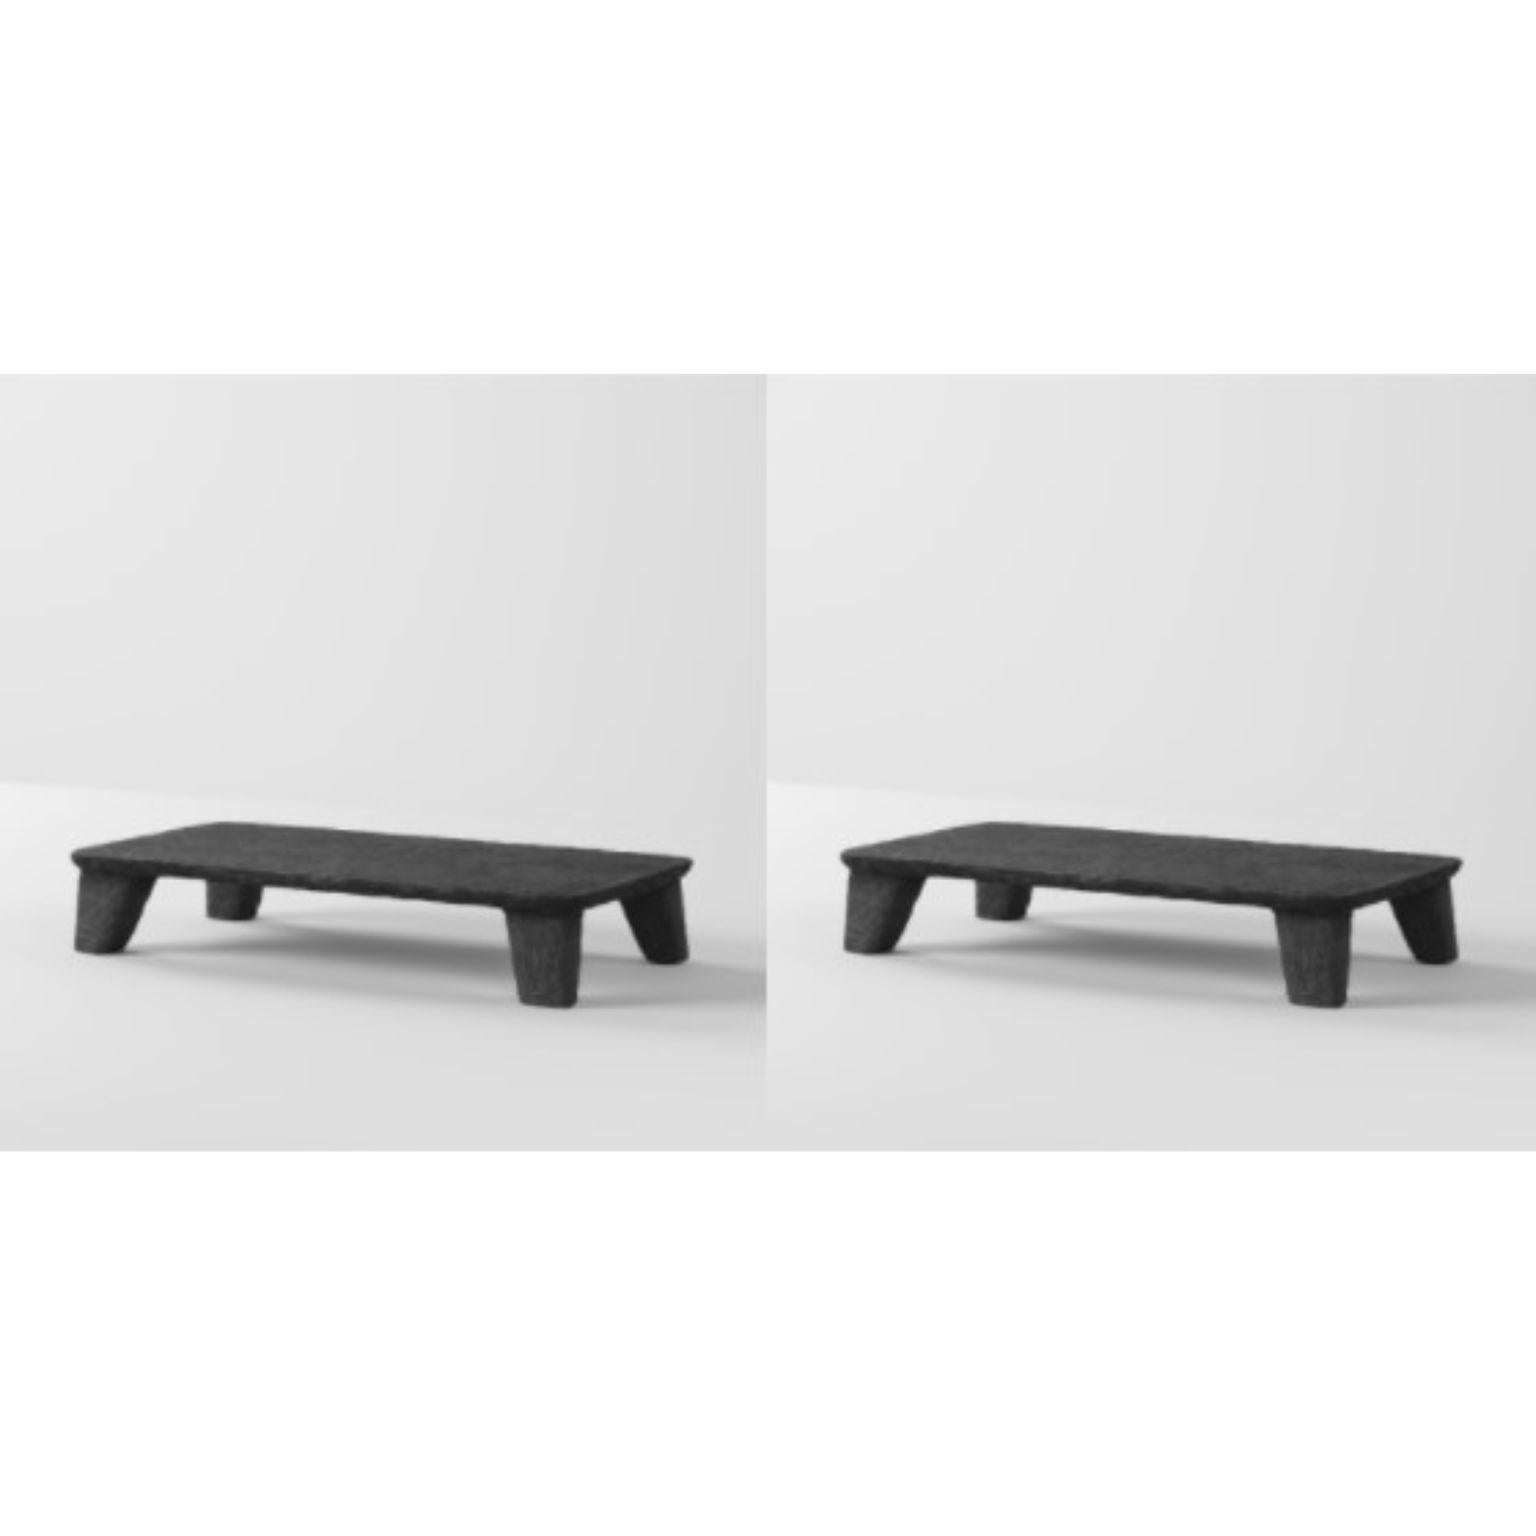 Set of 2 Ztista low tables by Faina
Design: Victoriya Yakusha
Materials: Steel Frame, a Blend of Cellulose, Clay, Flax Fiber, Wood Chips, Biopolymer Cover
Dimensions: D 80 x W 160 x H 30 cm
Available in 12 colours.

Almost carved in stone,